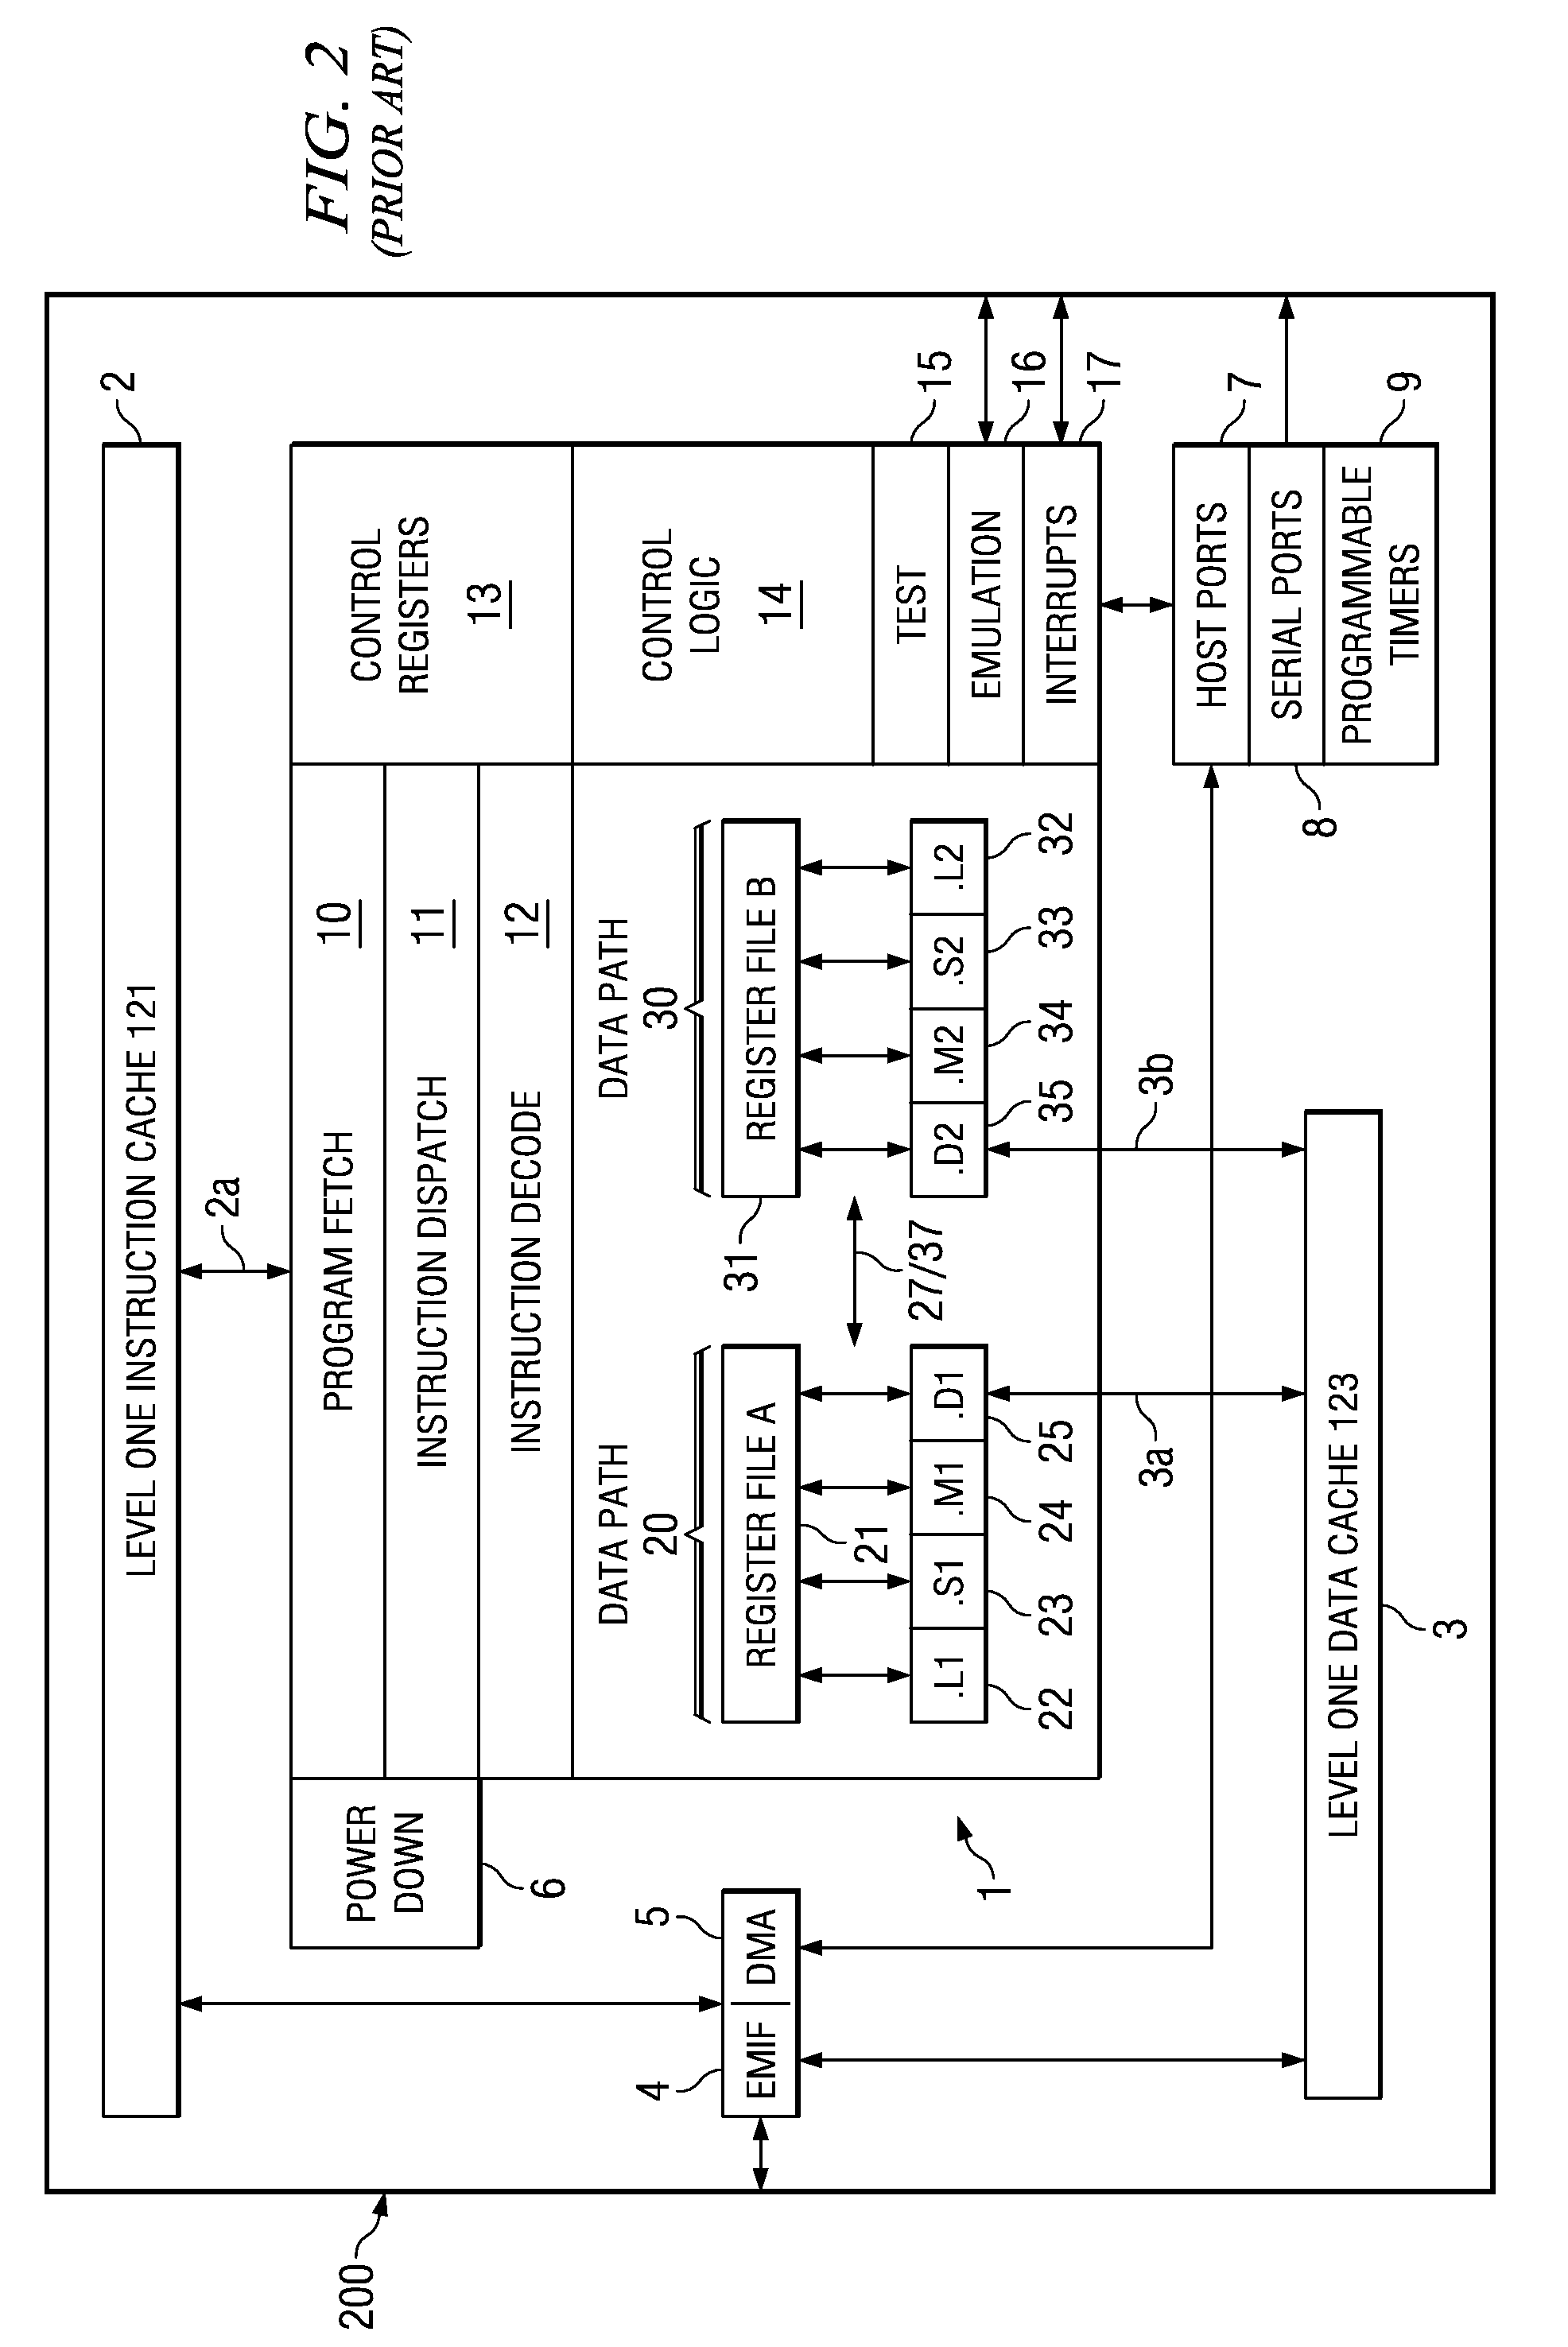 Method of CABAC Significance MAP Decoding Suitable for Use on VLIW Data Processors